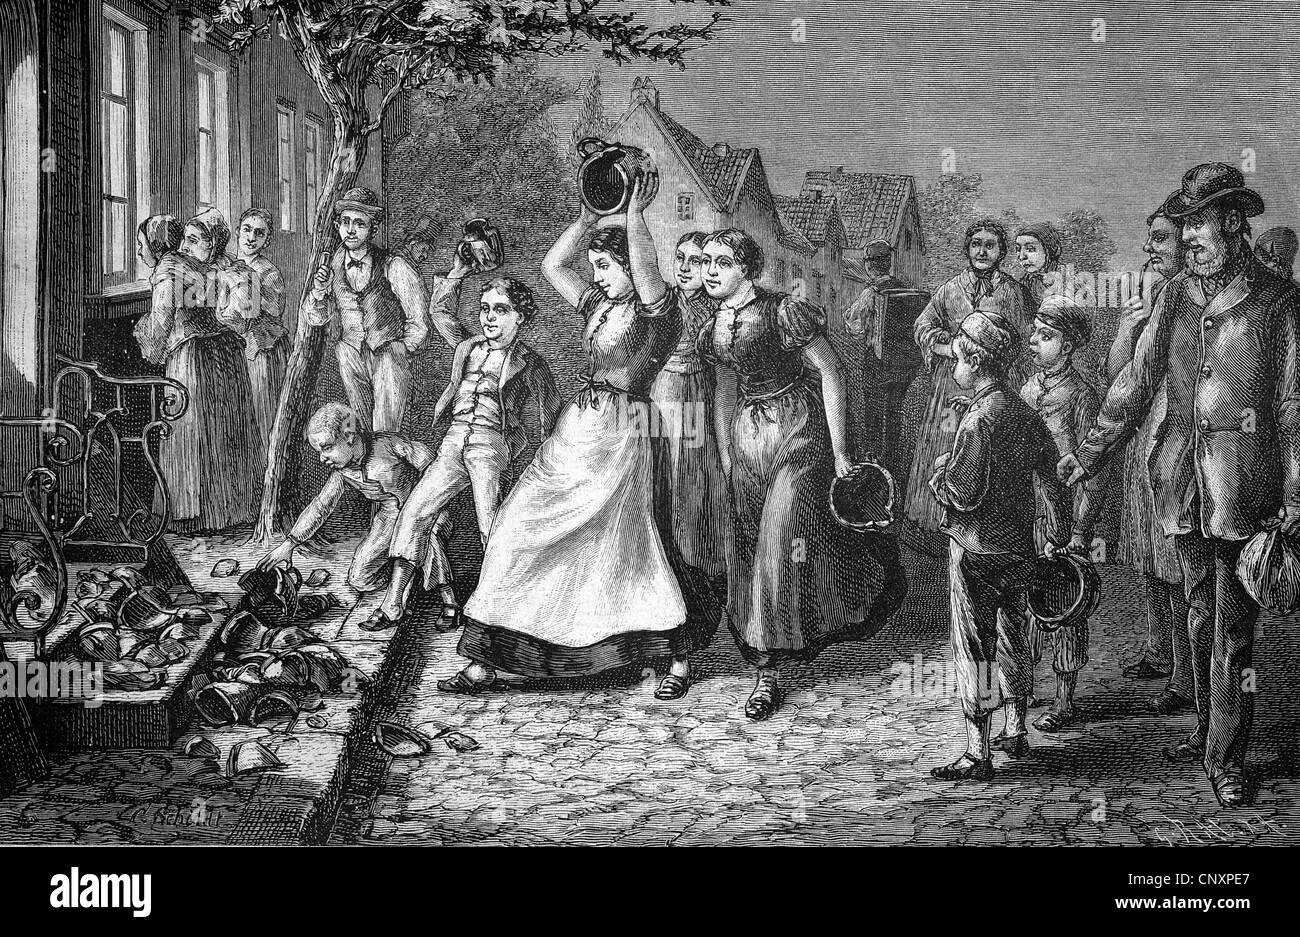 The shattering of crockery on an eve-of-the-wedding party in northern Germany, Germany, historical engraving, 1883 Stock Photo